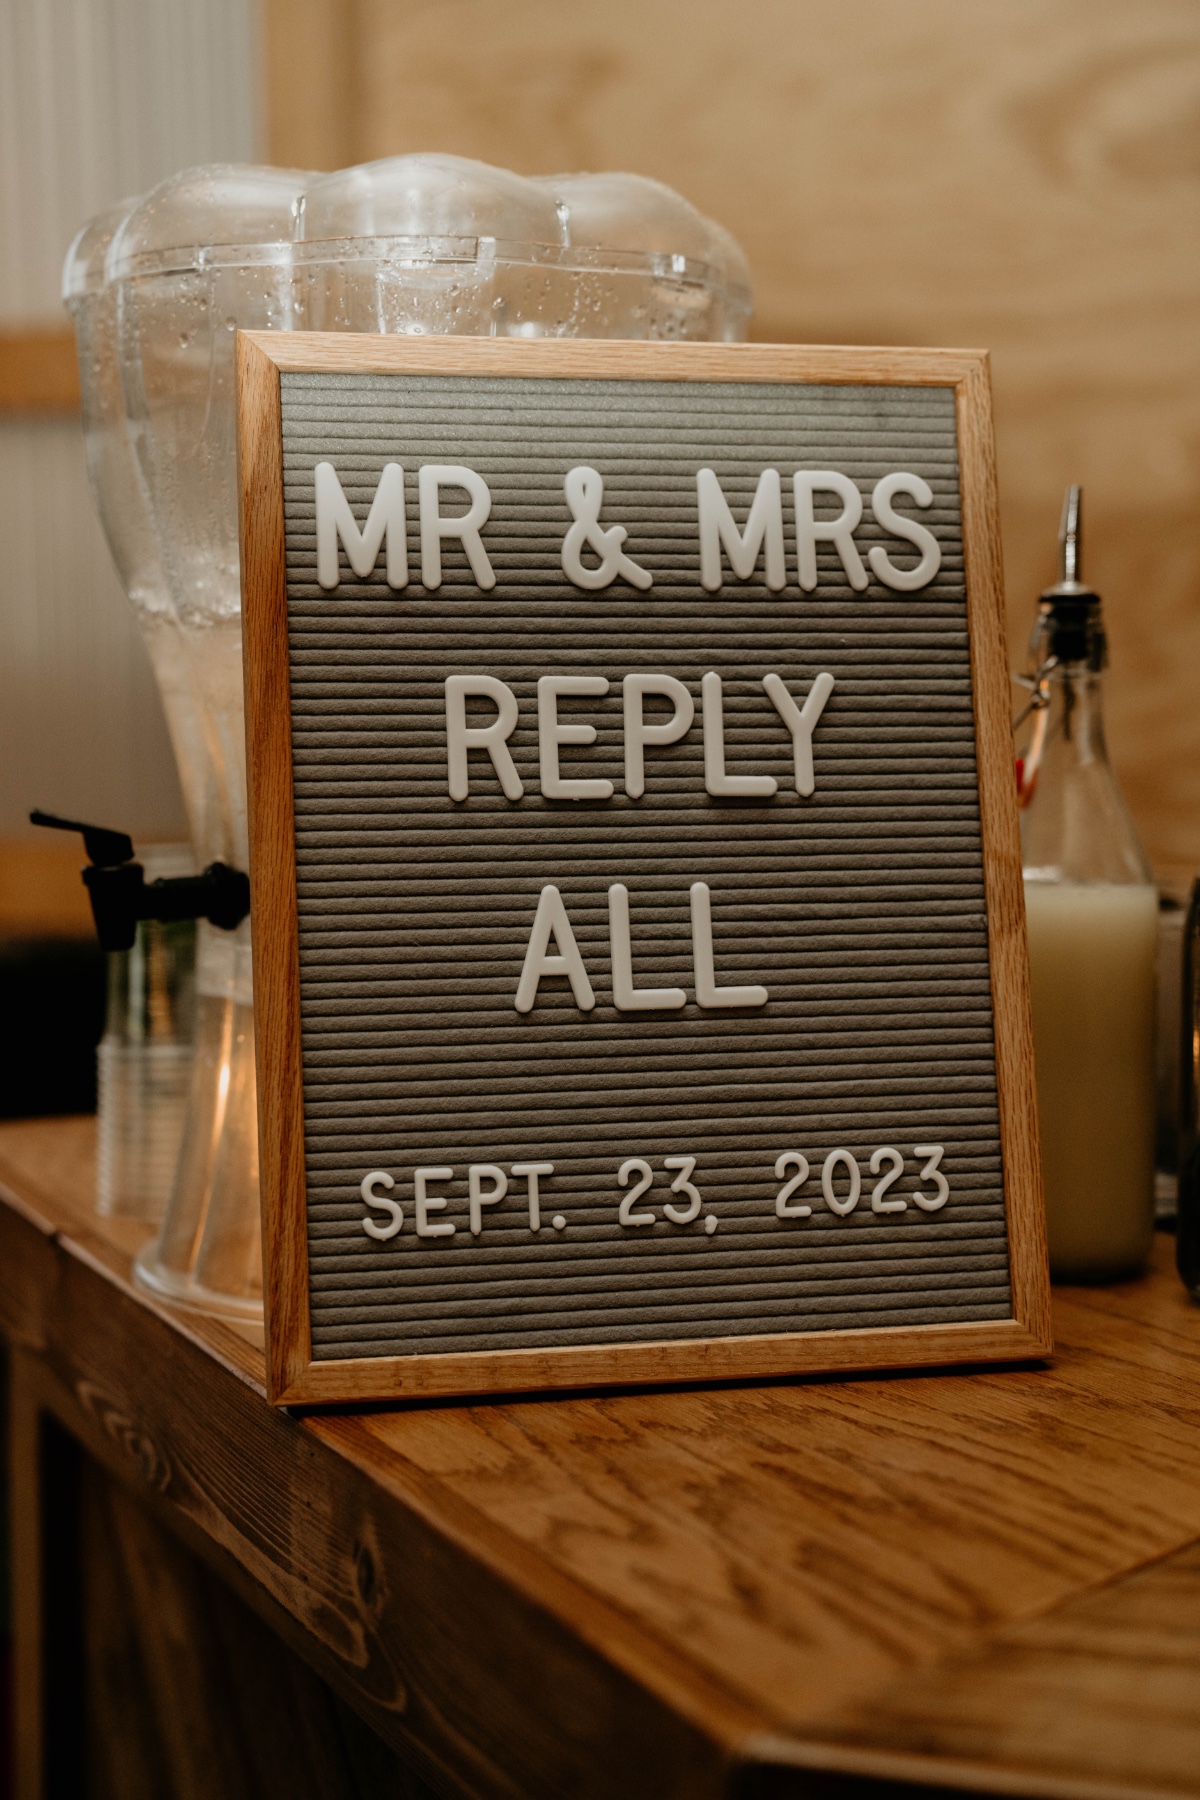 the reply all guy got married